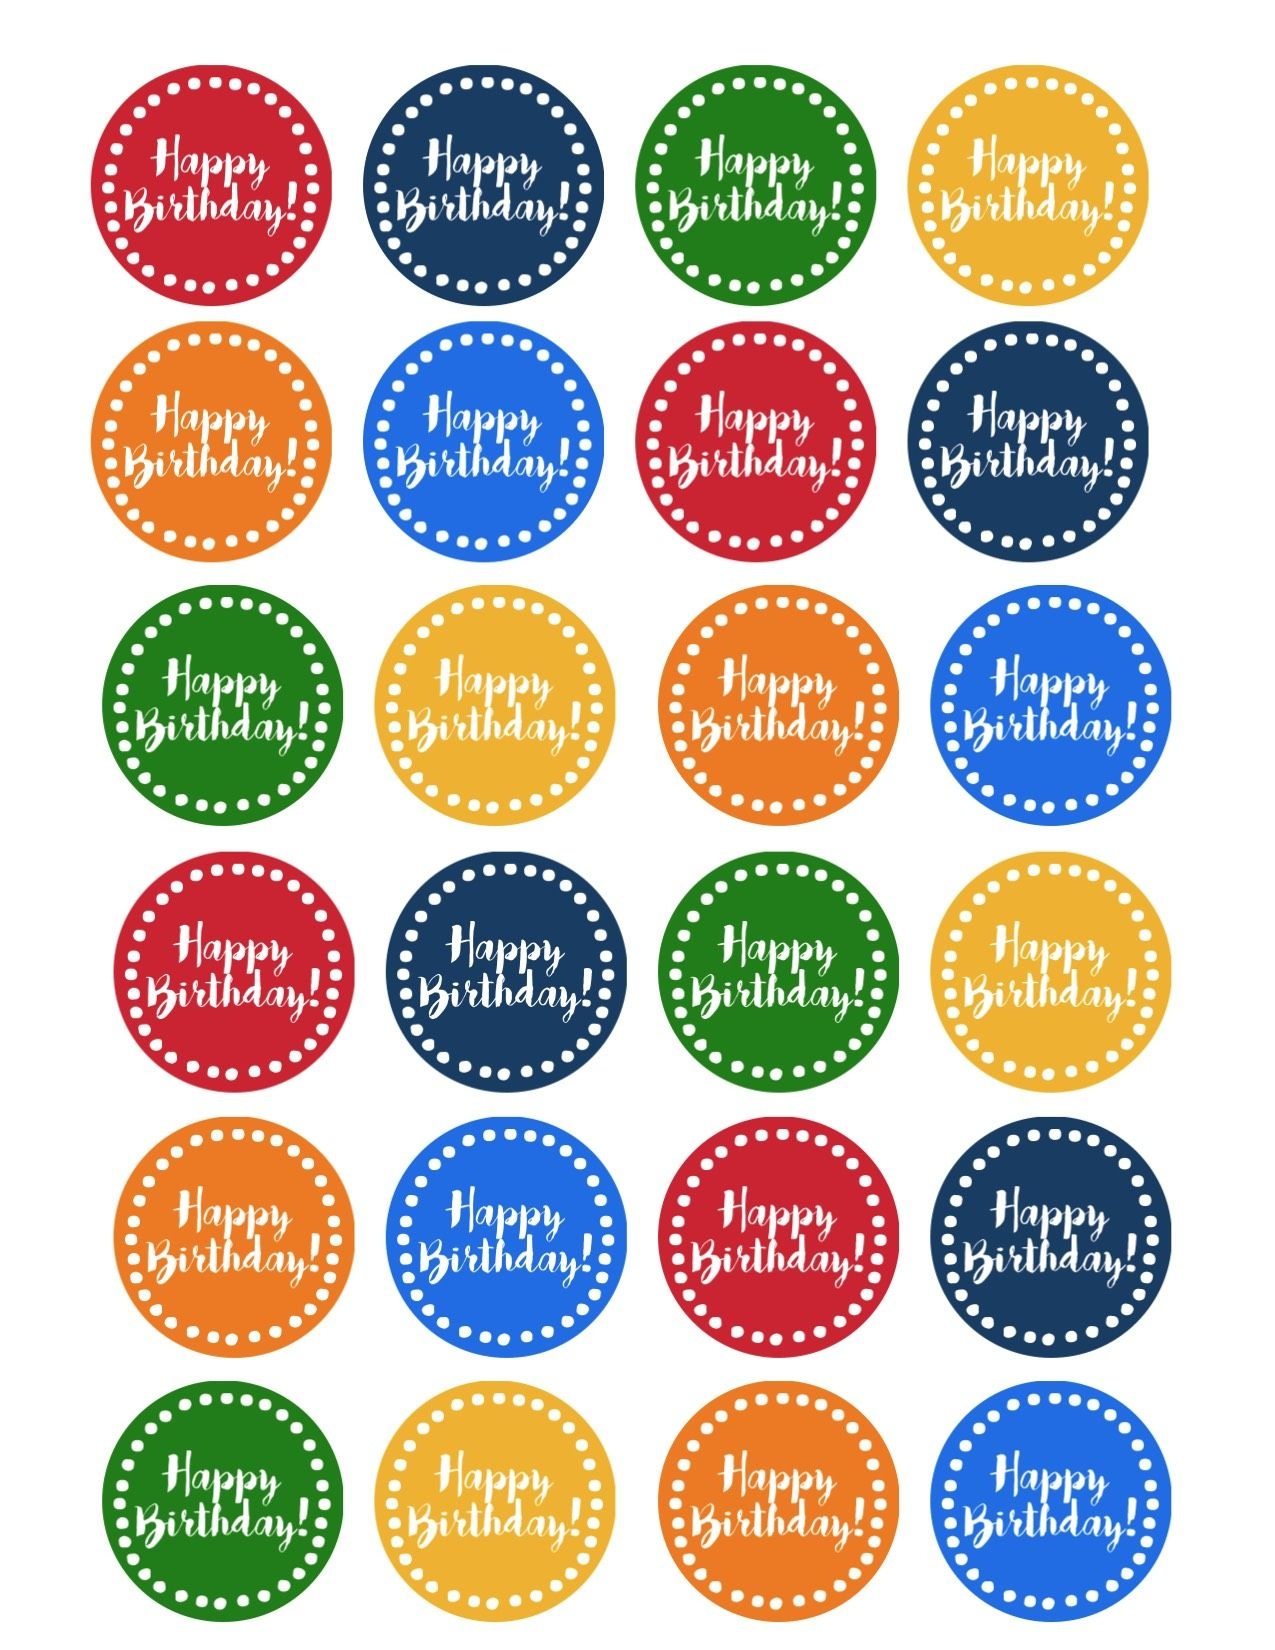 Happy Birthday Cupcake Toppers Free Printable | Printables | Happy - Cupcake Topper Templates Free Printable